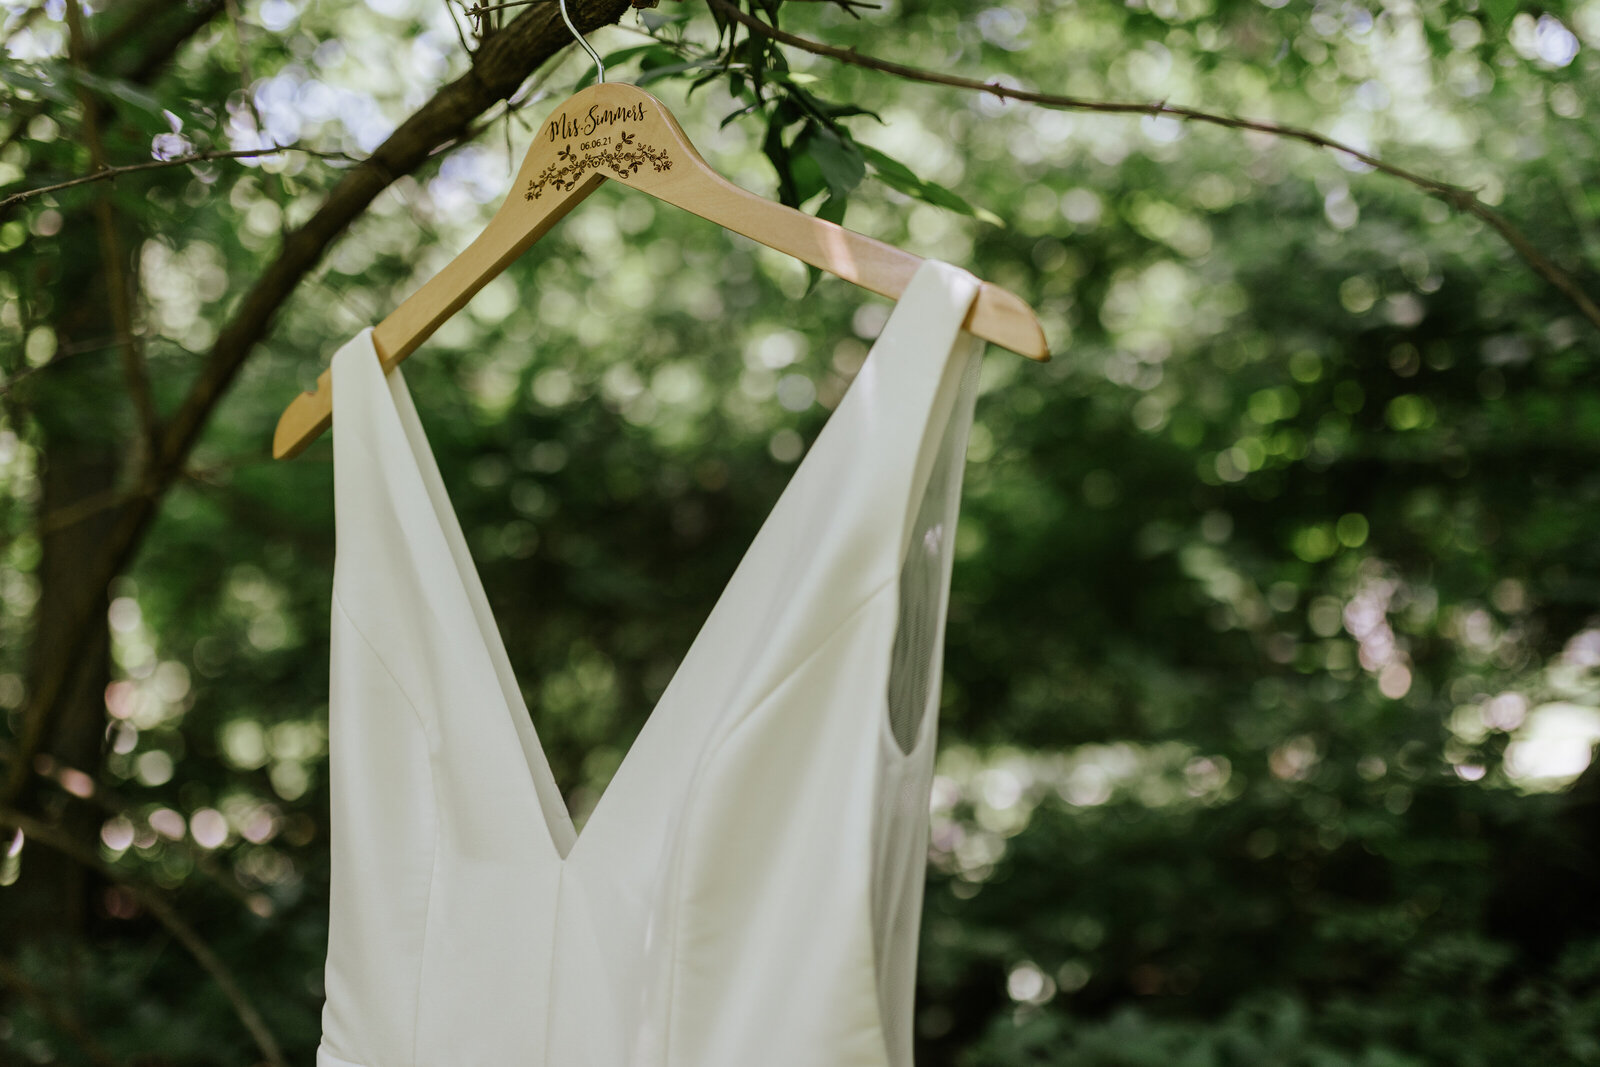 A wedding dress hangs from a tree in the woods on a wooden hanger